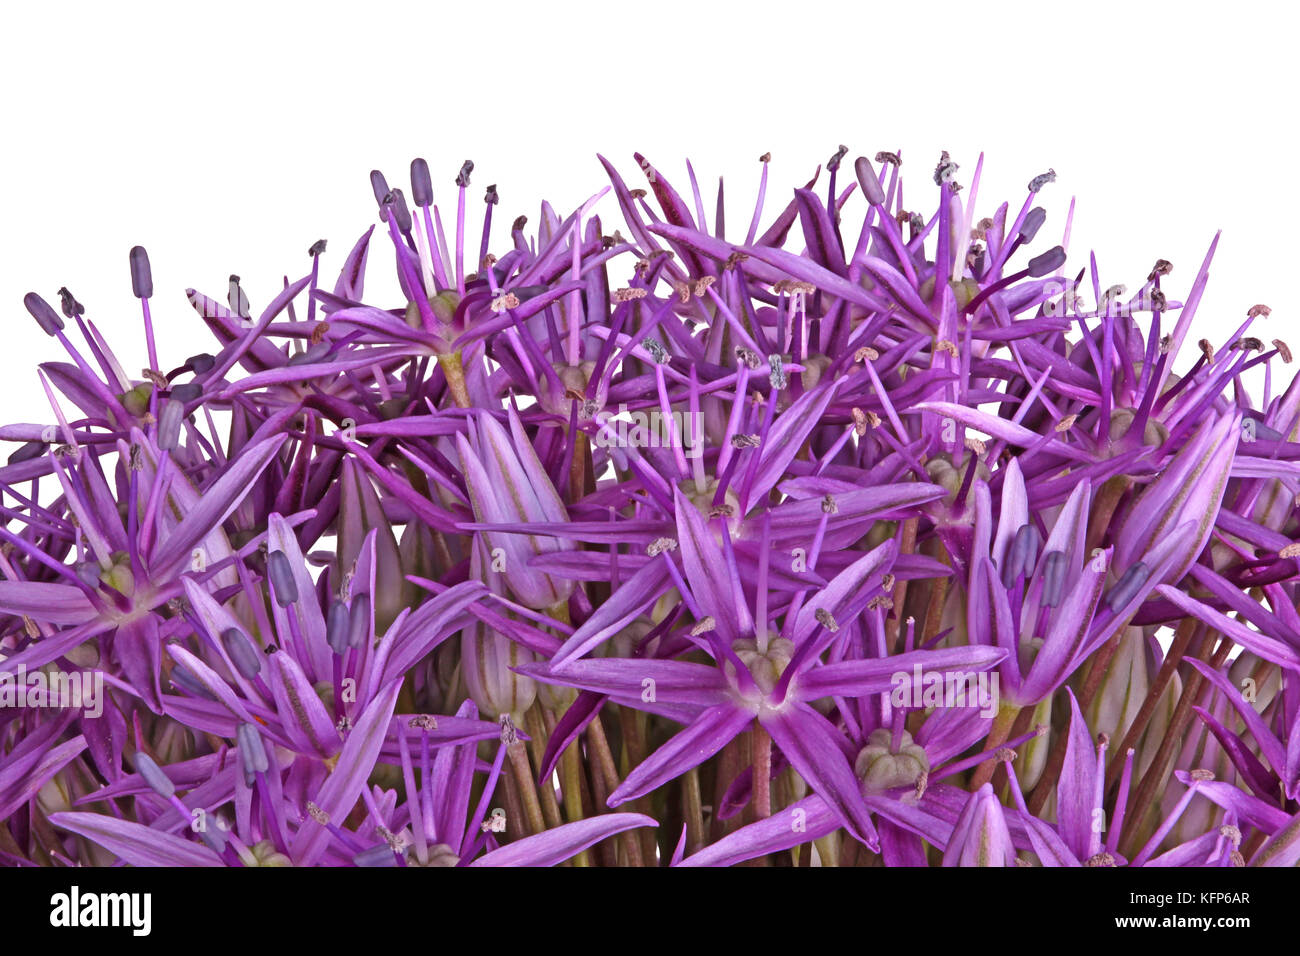 Many purple flowers of the ornamental onion (Allium giganteum) cultivar Globemaster isolated against a white background Stock Photo